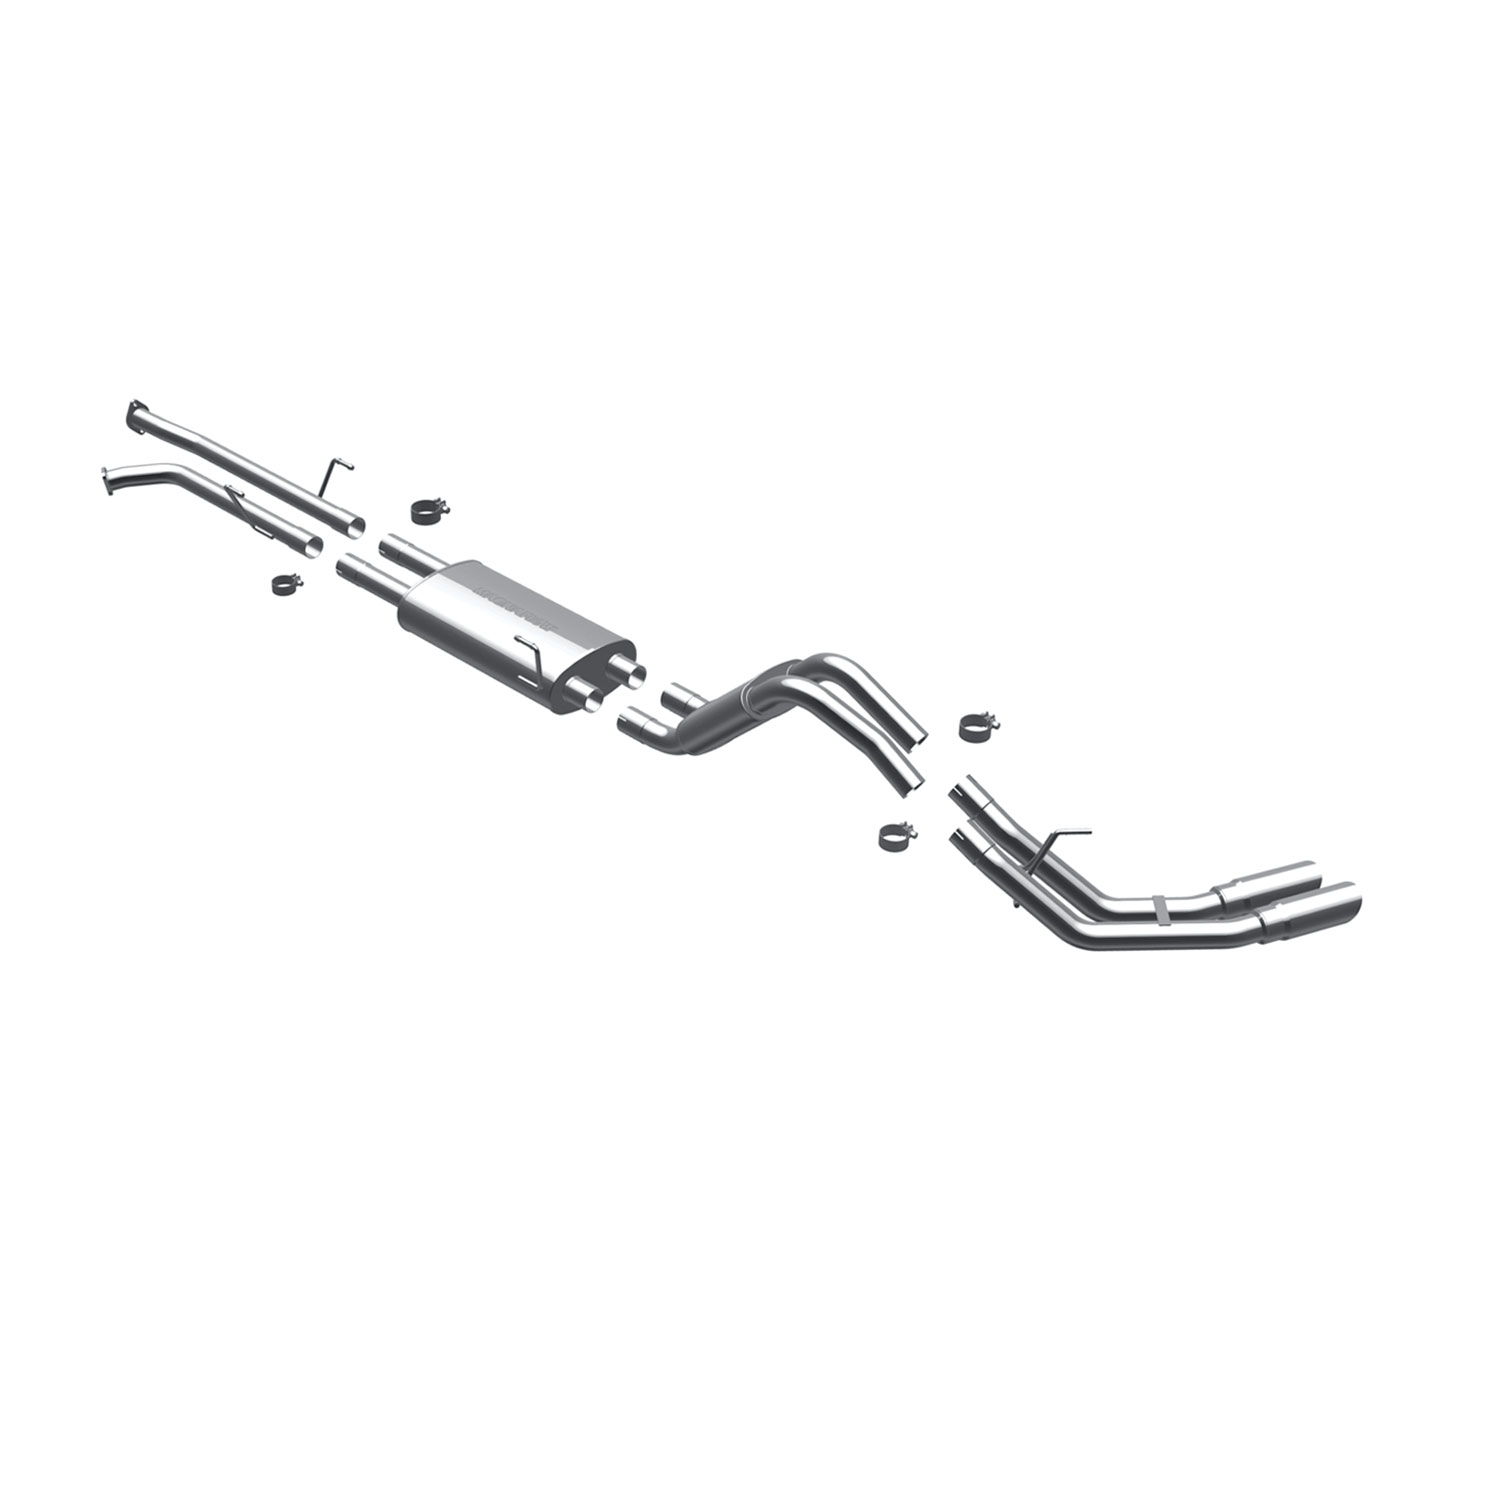 MF Series Cat-Back Exhaust System 2007-09 Tundra 4.7L (Extended Cab, 78.7" Bed)